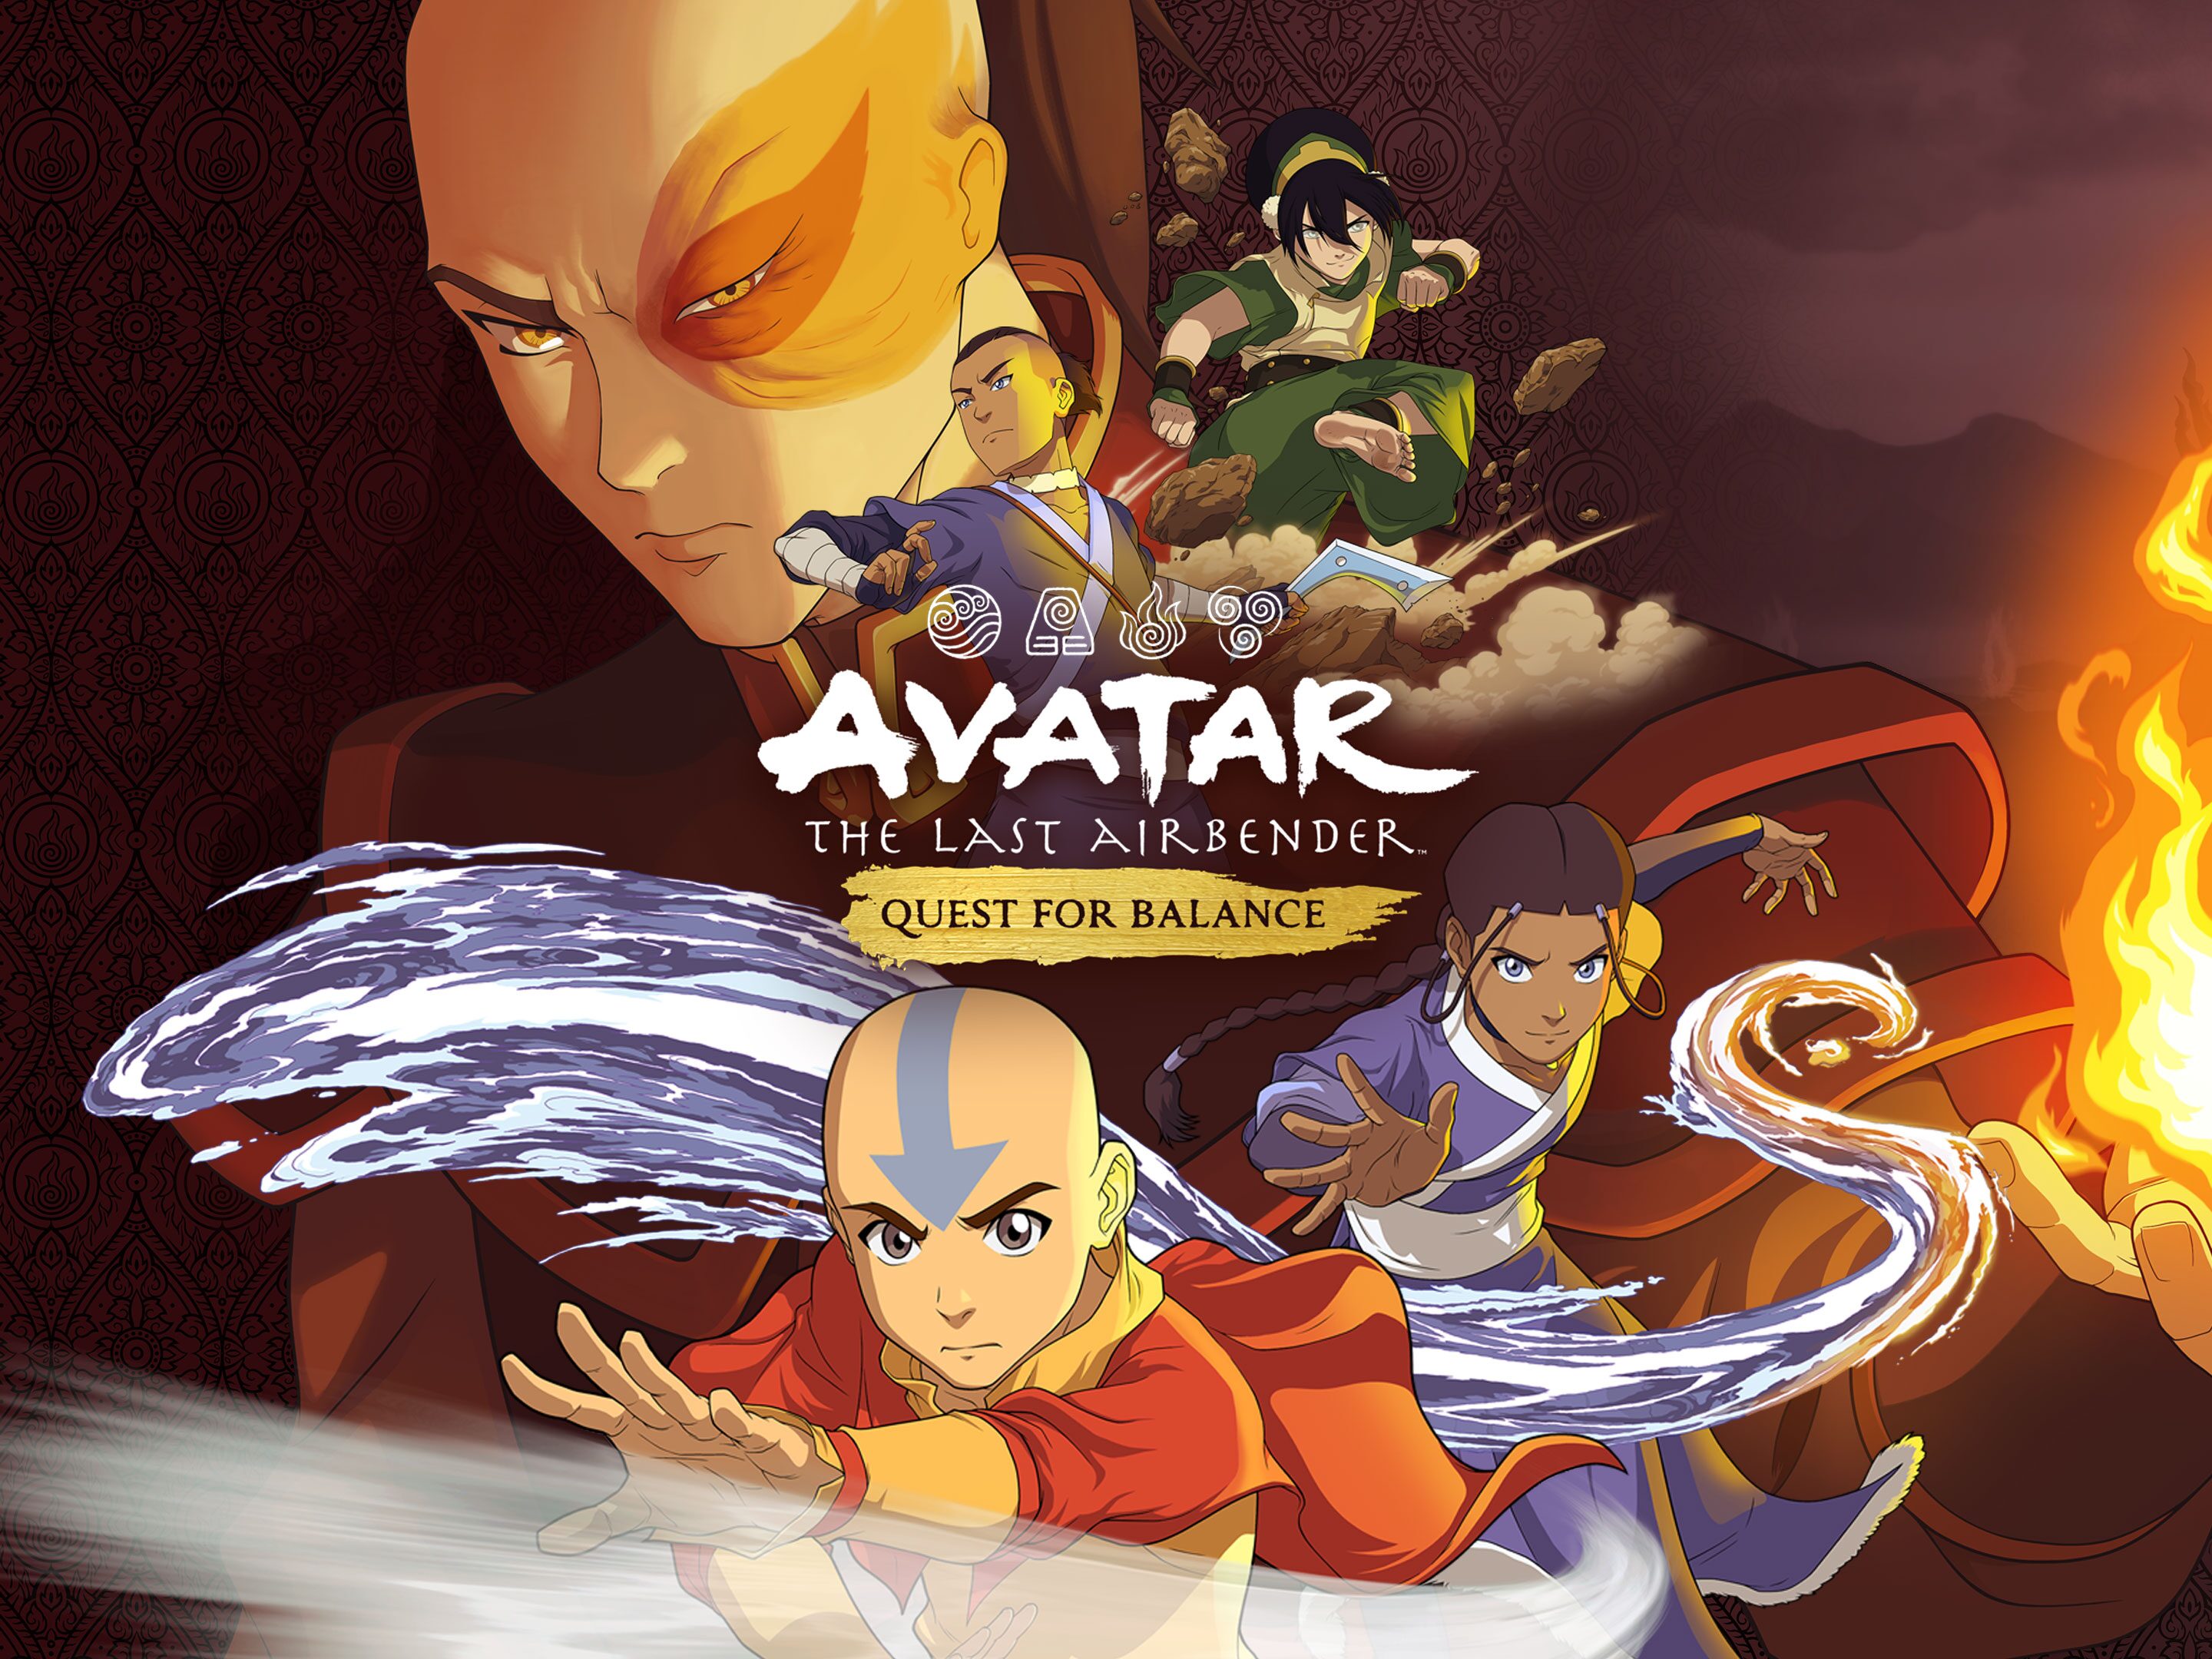 Trader Games - AVATAR THE LAST AIRBENDER: QUEST FOR BALANCE PS5 EURO NEW  (EN/FR/DE/ES/IT) on Playstation 5